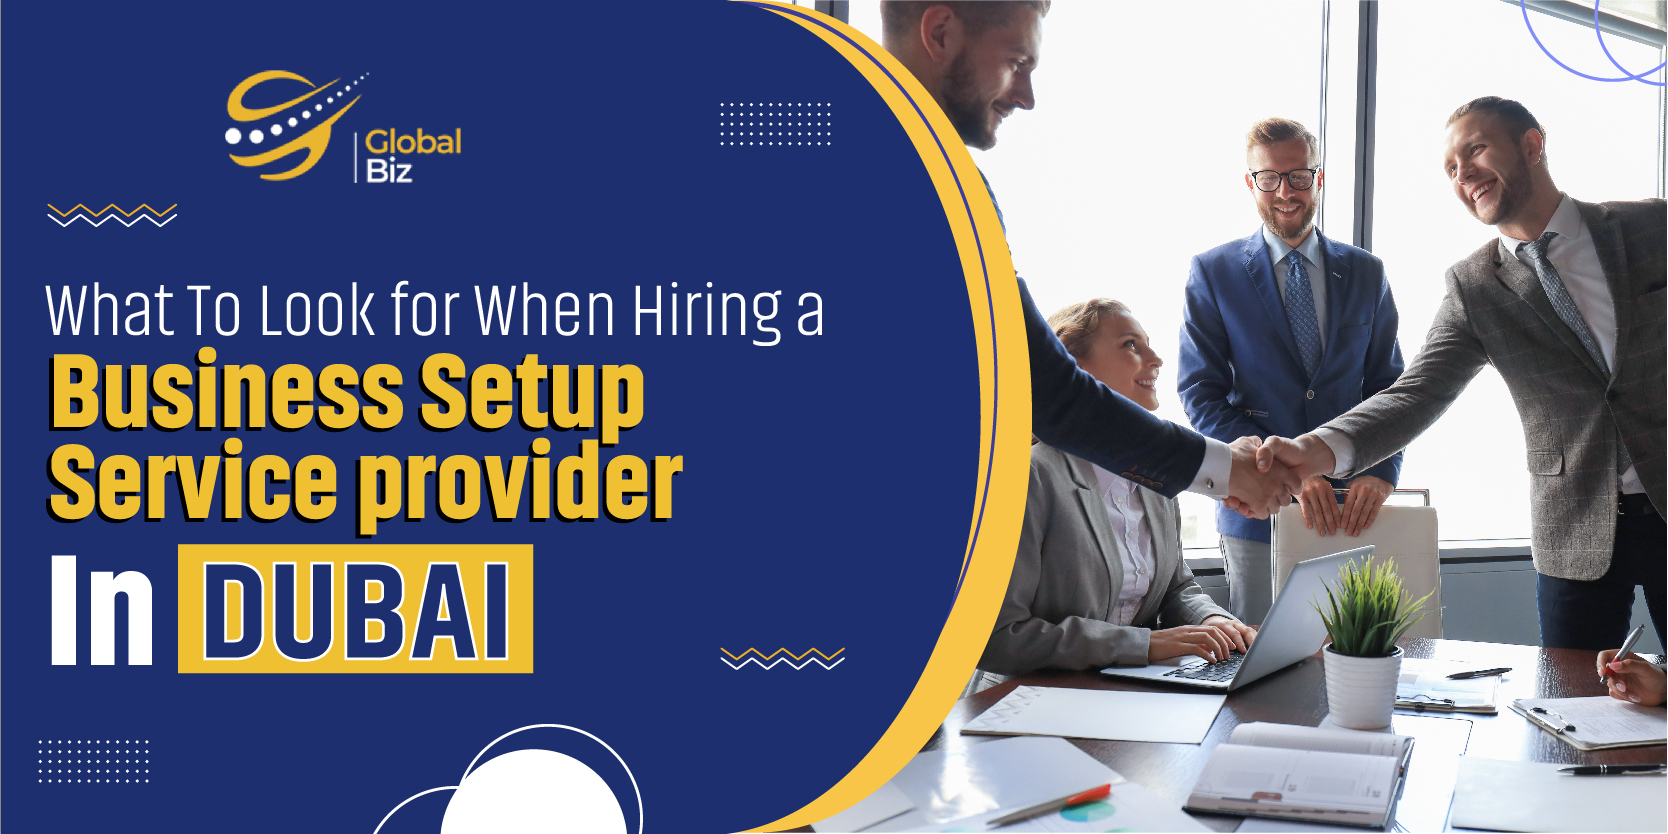 What To Look for When Hiring a Business Setup Service Provider In Dubai